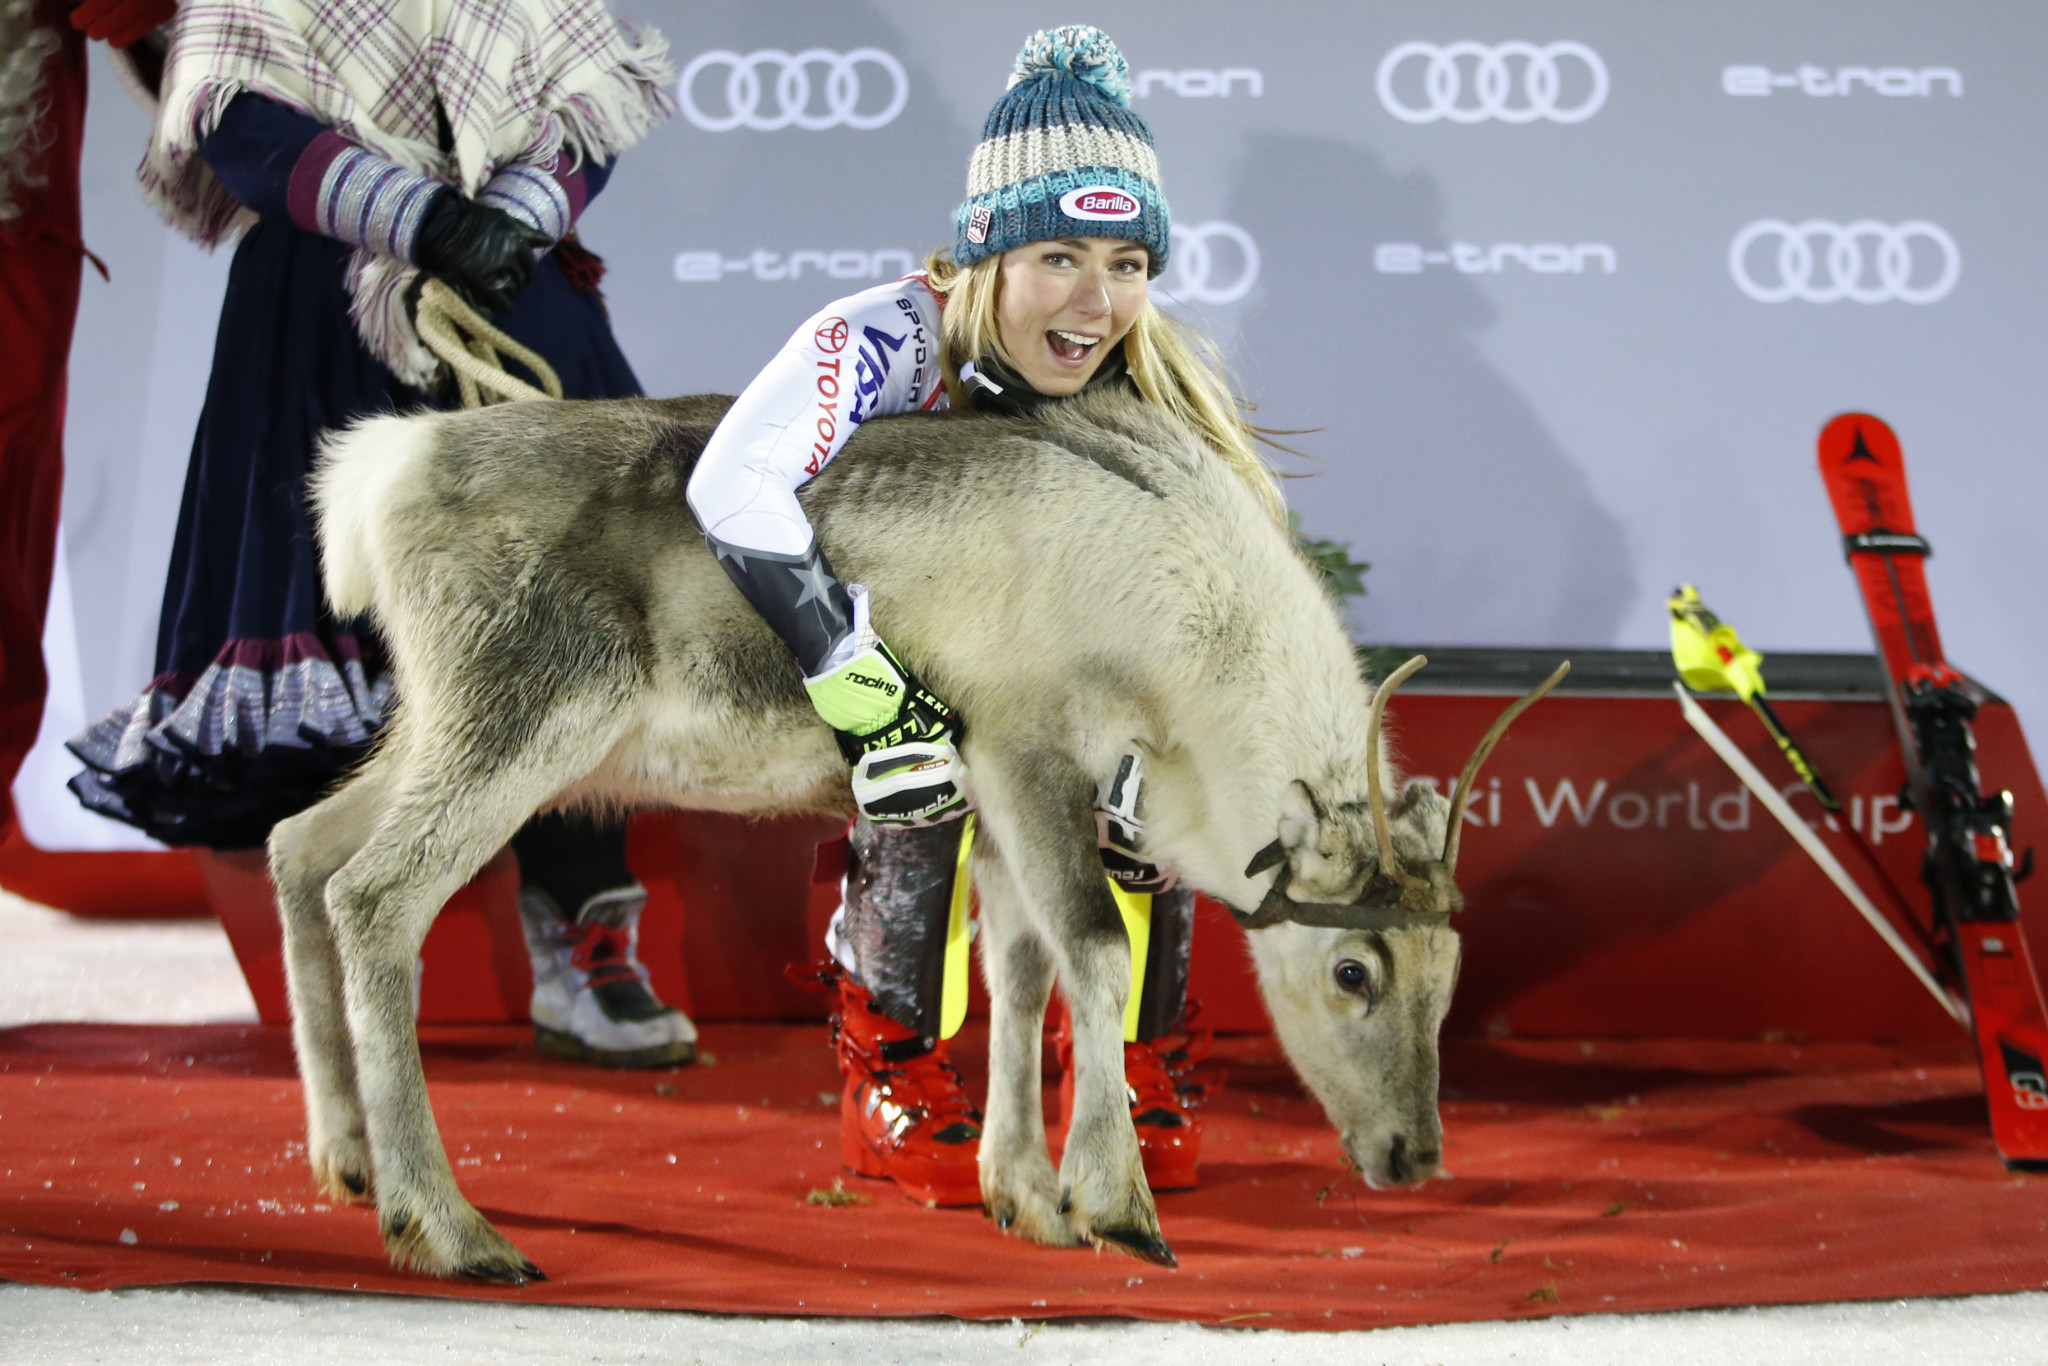 Mikaela Shiffrin won her third reindeer earlier this month ©Getty Images